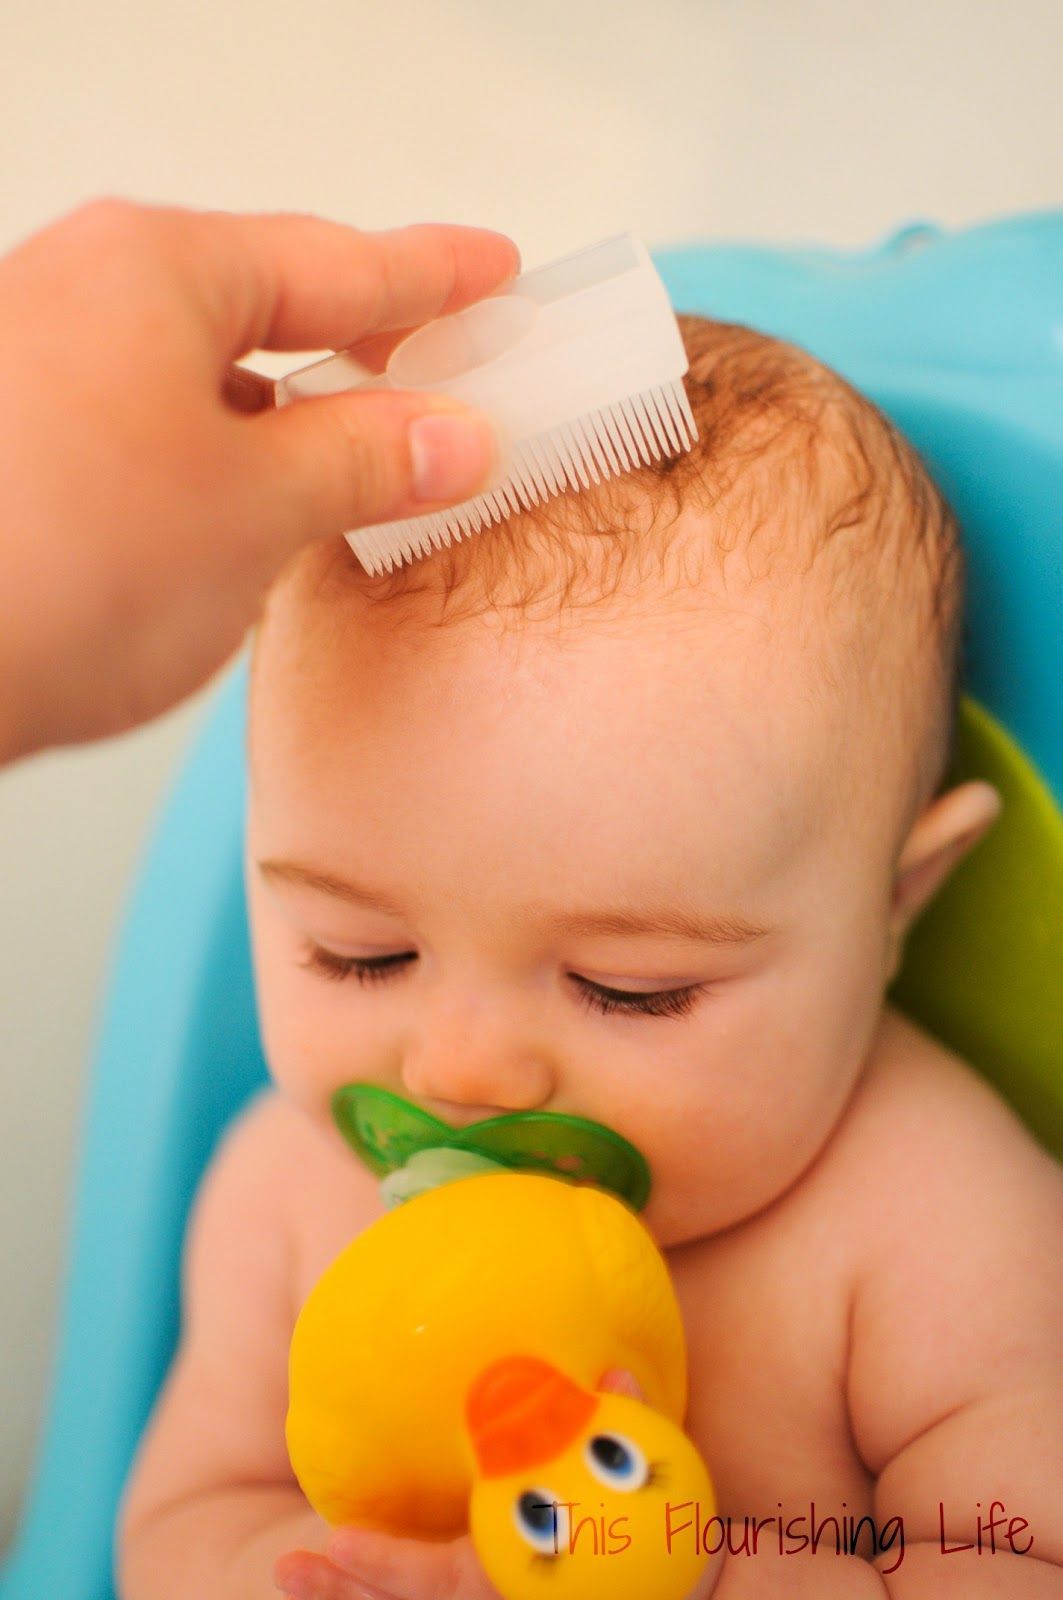 Cradle Cap…use HYDROCORTISONE CREAM. The pediatrician told me this and it cleared Elis up in just a couple days.  Thank goodness